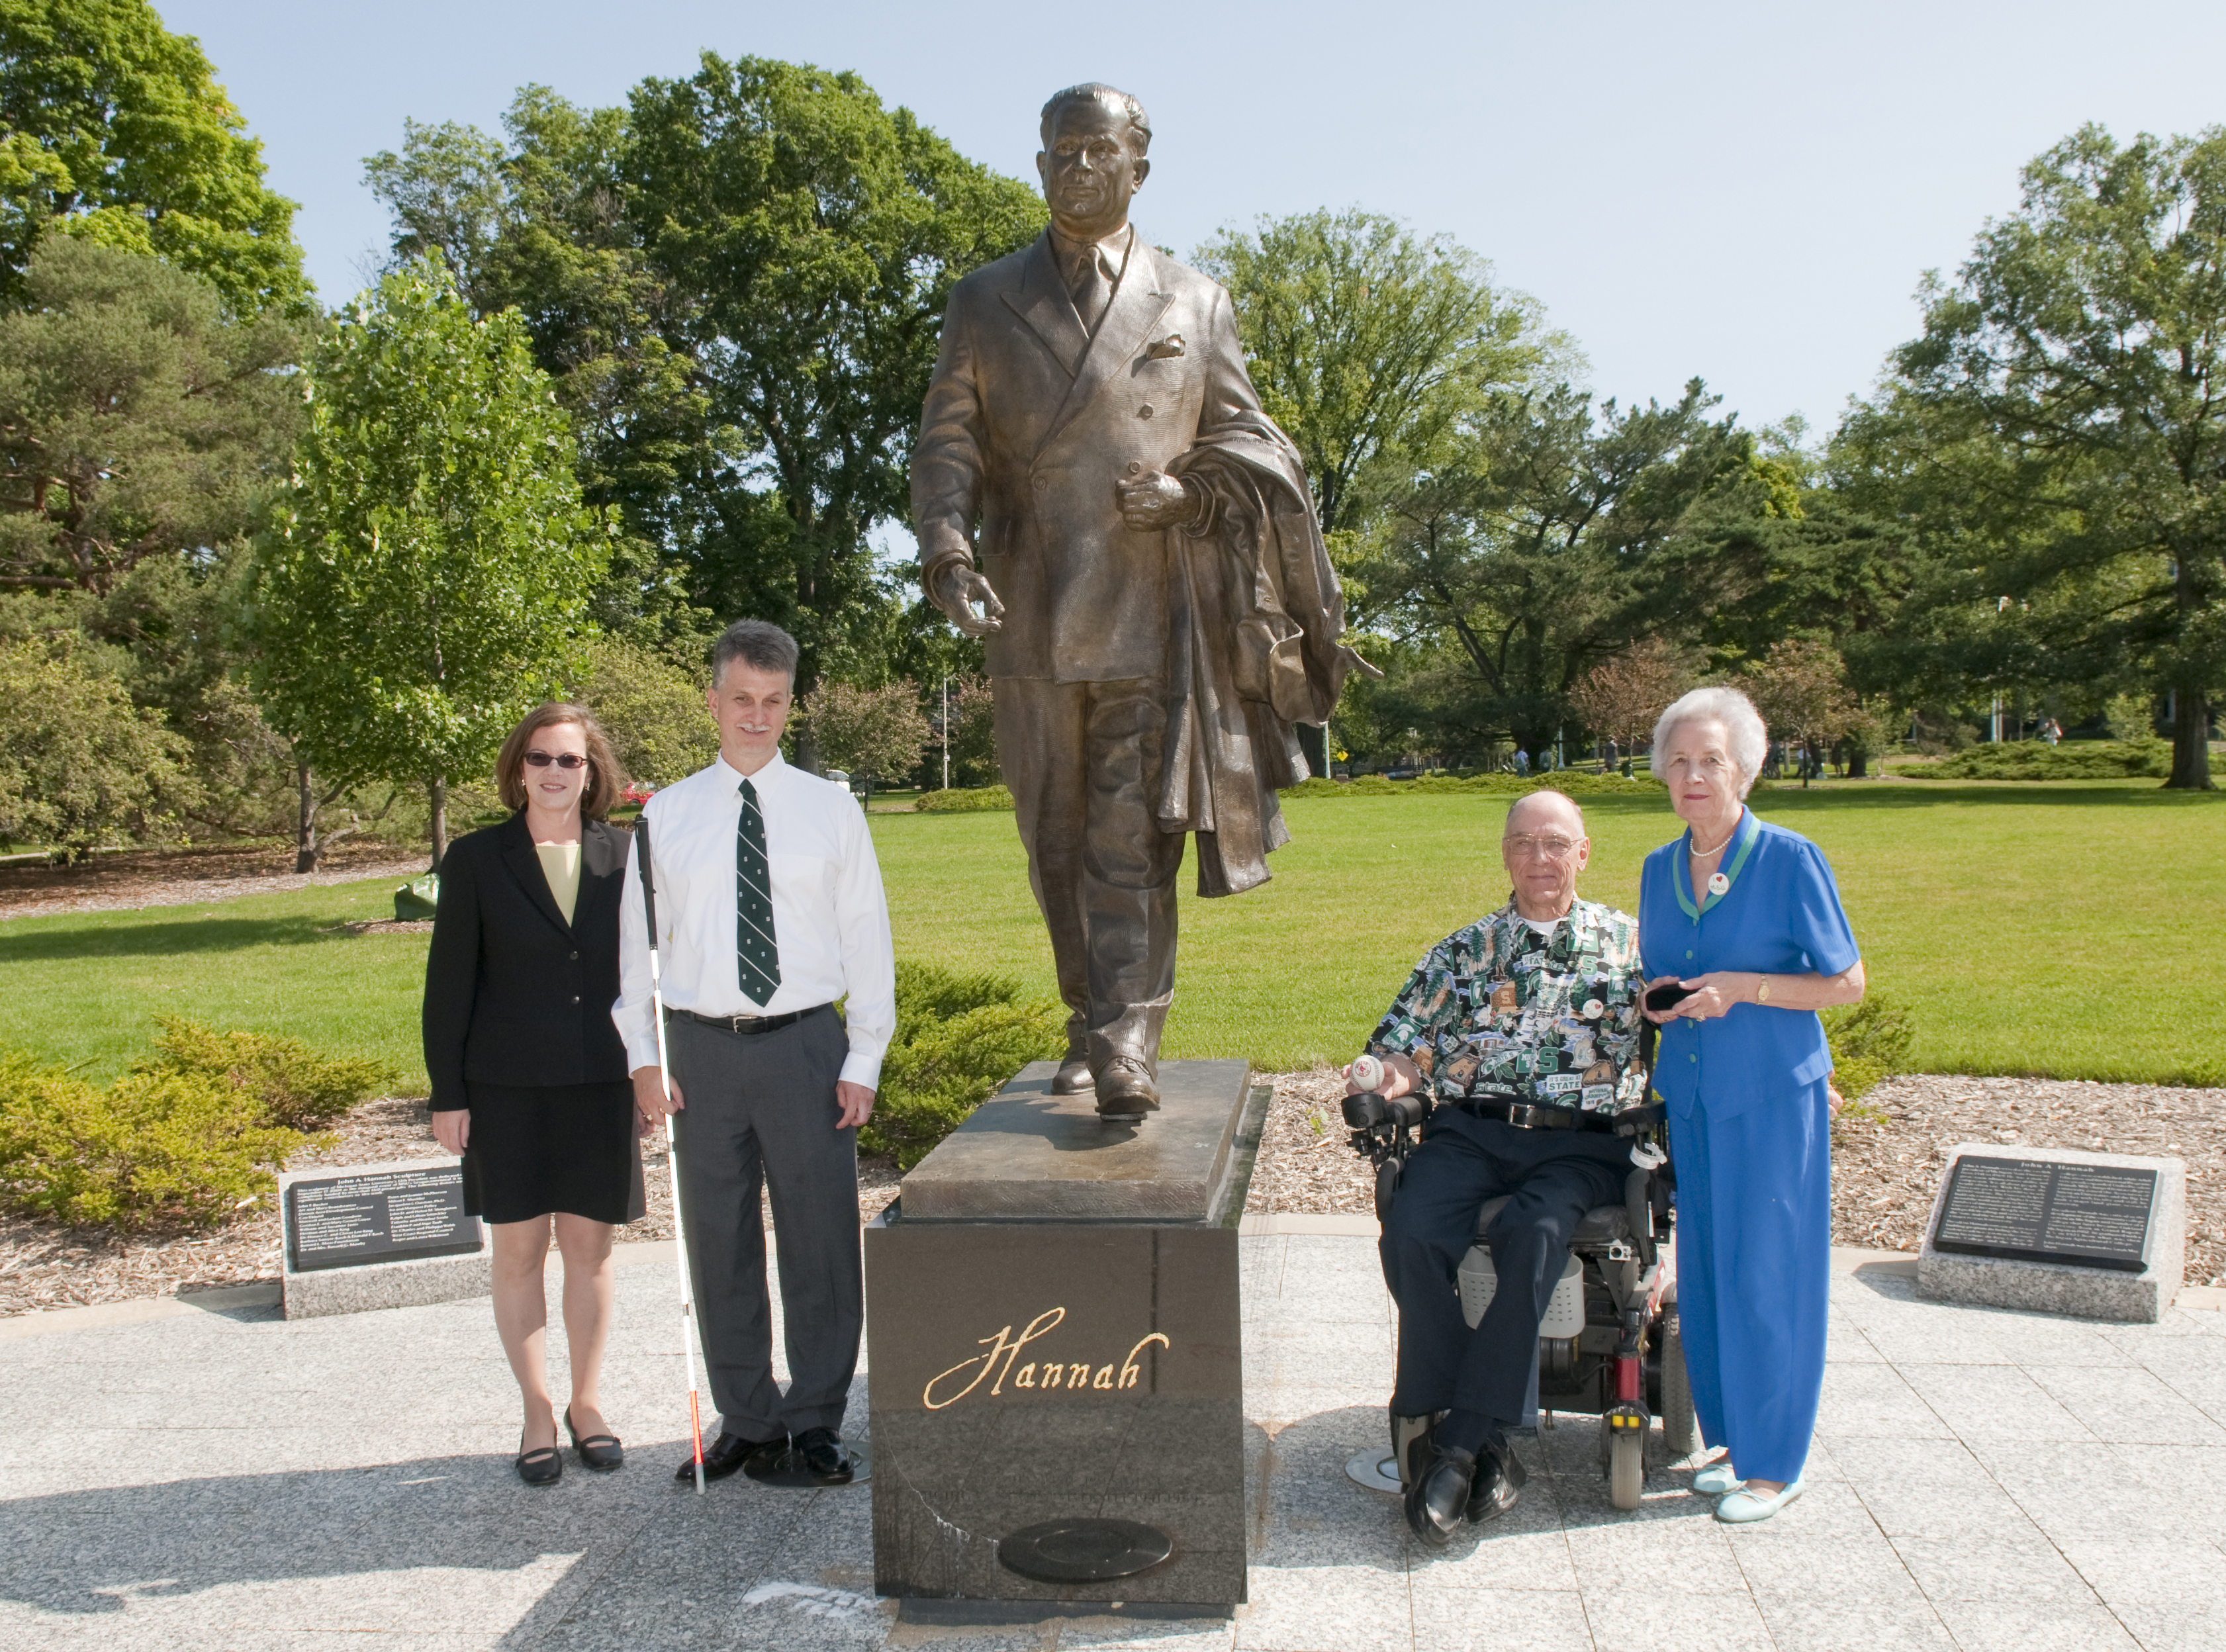 Harold and Phyllis Wochholz standing with RCPD Director Hudson and MSU staff in front of John Hannah statue on campus